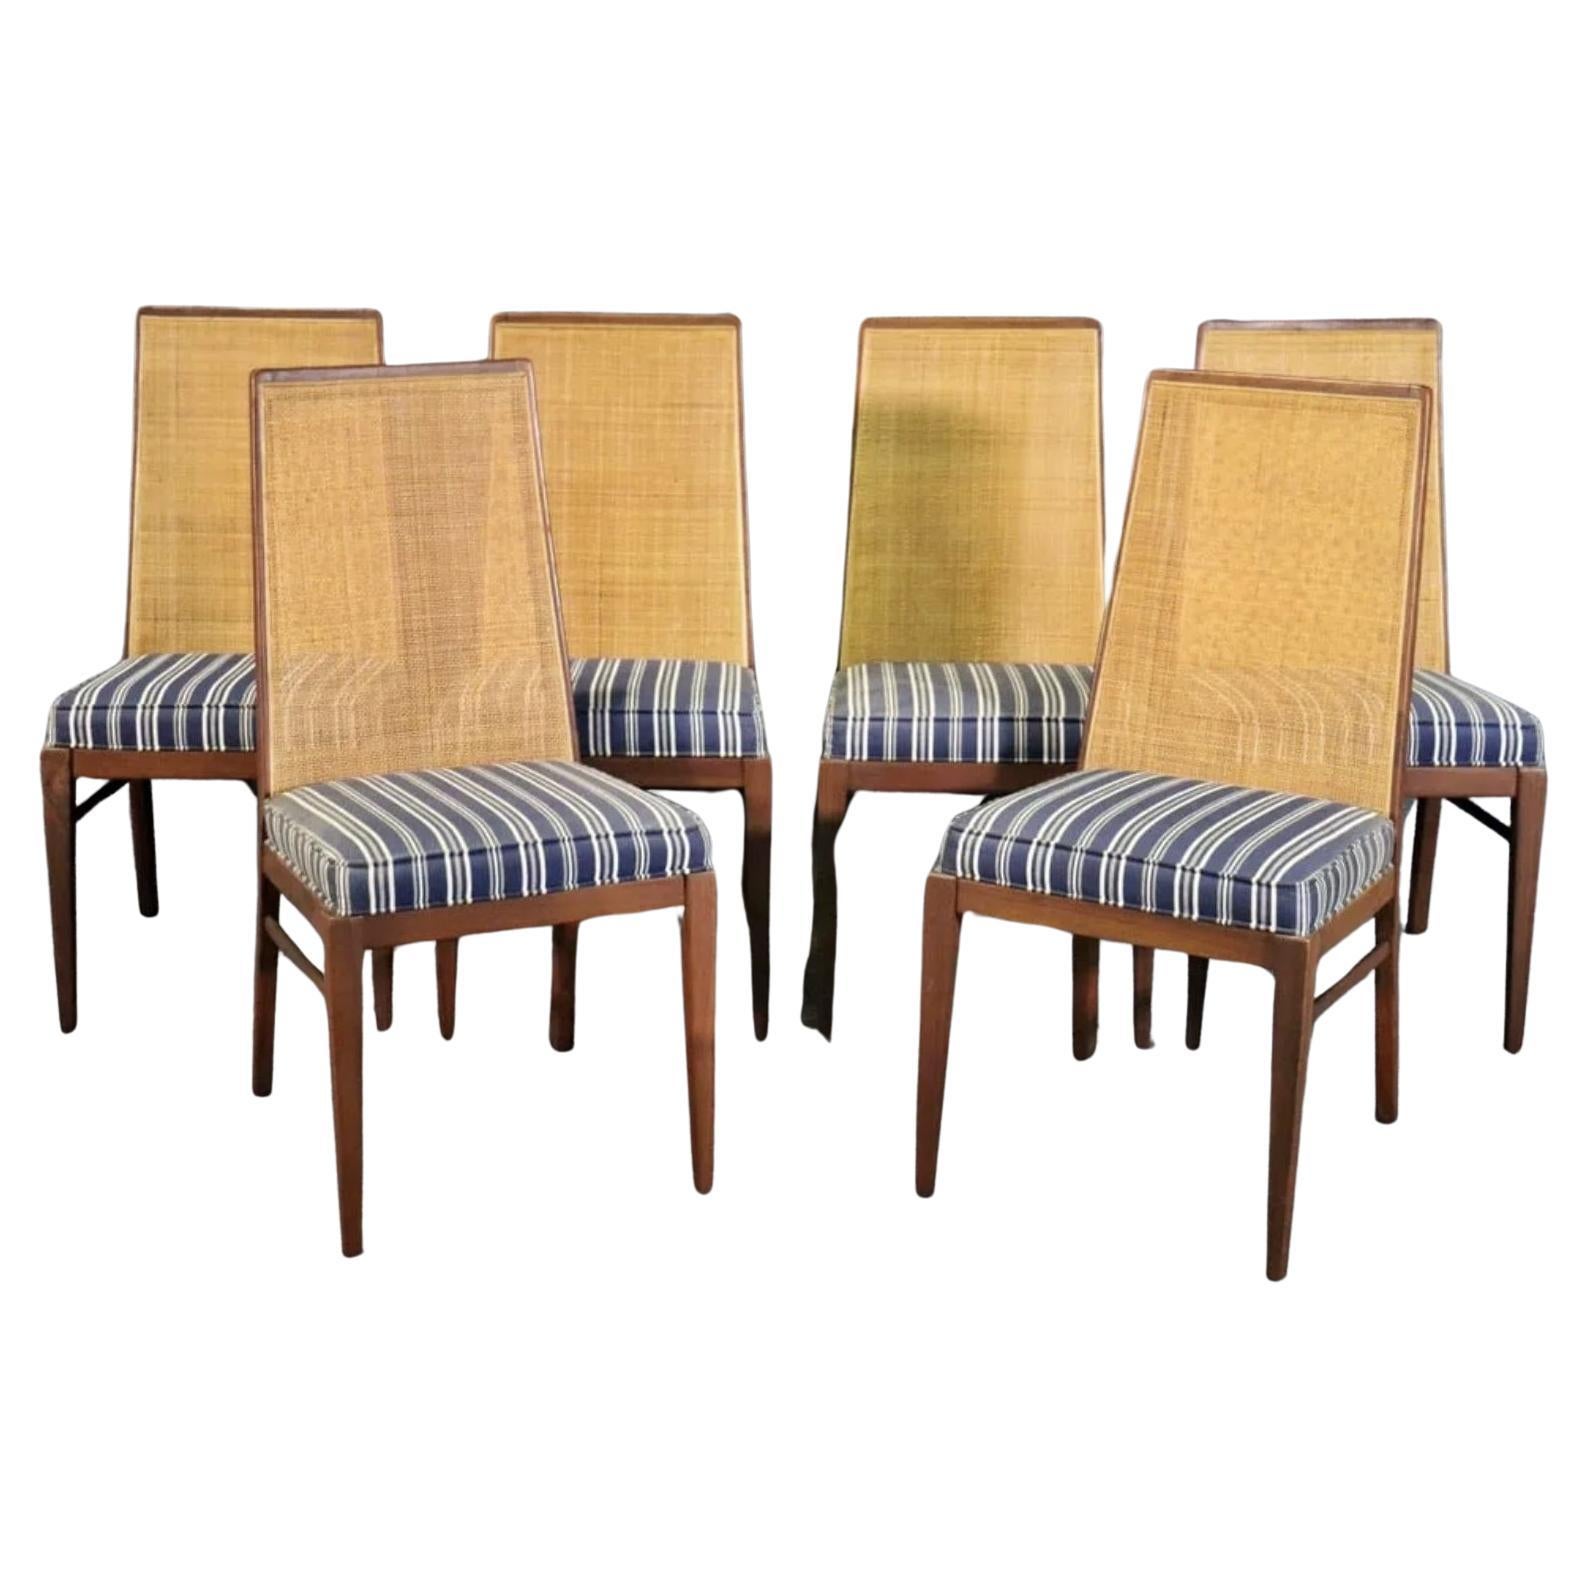 Jack Cartwright Designed Dining Chairs